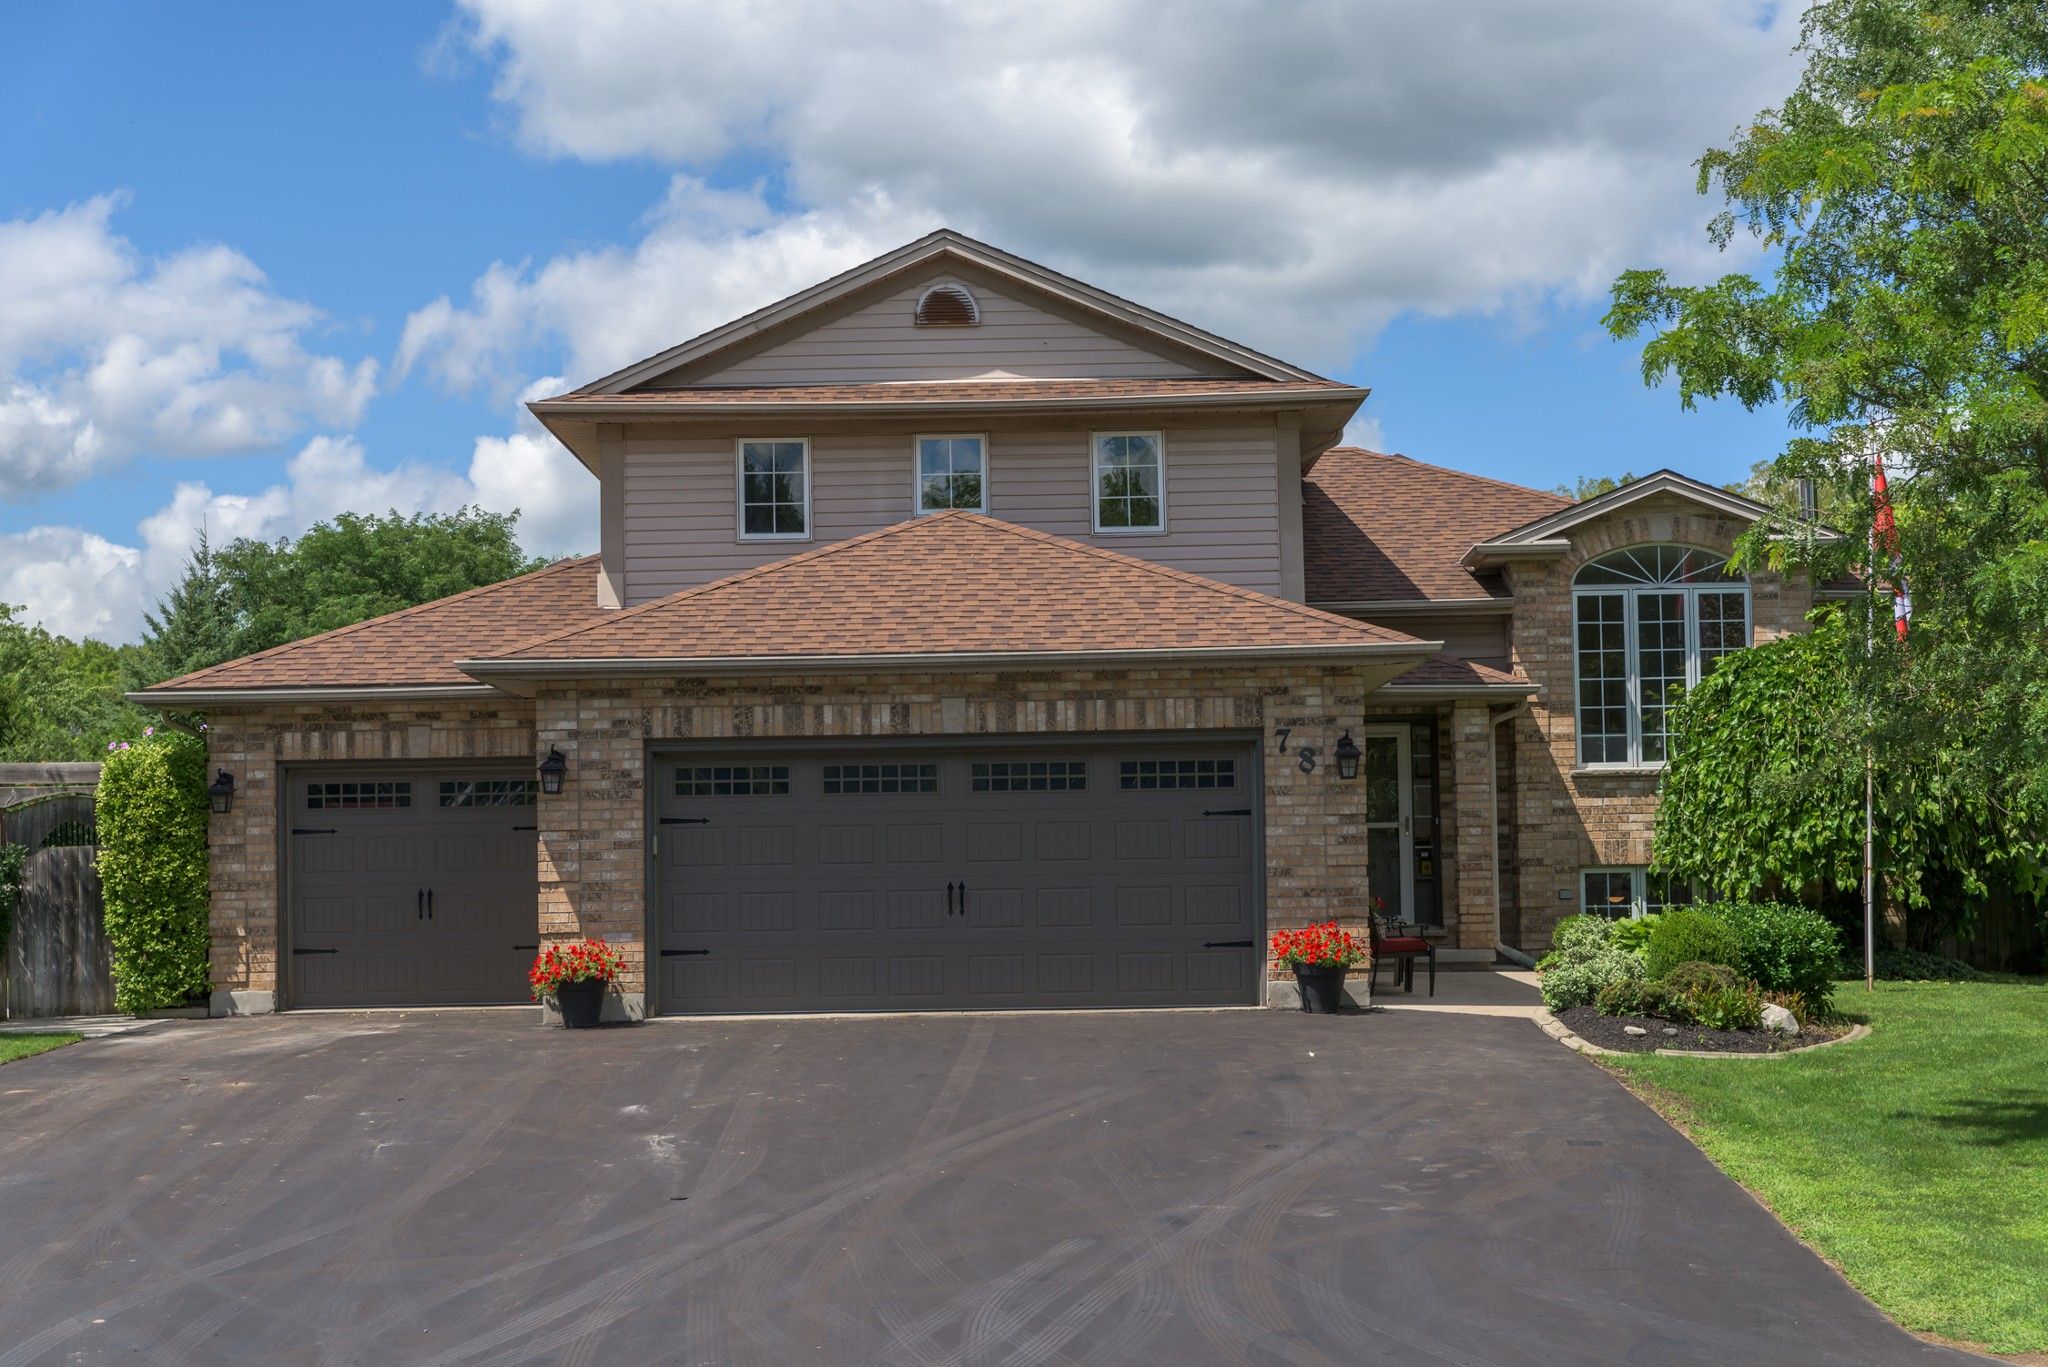 I have sold a property at 78 BIRCHCREST Drive in Kilworth
